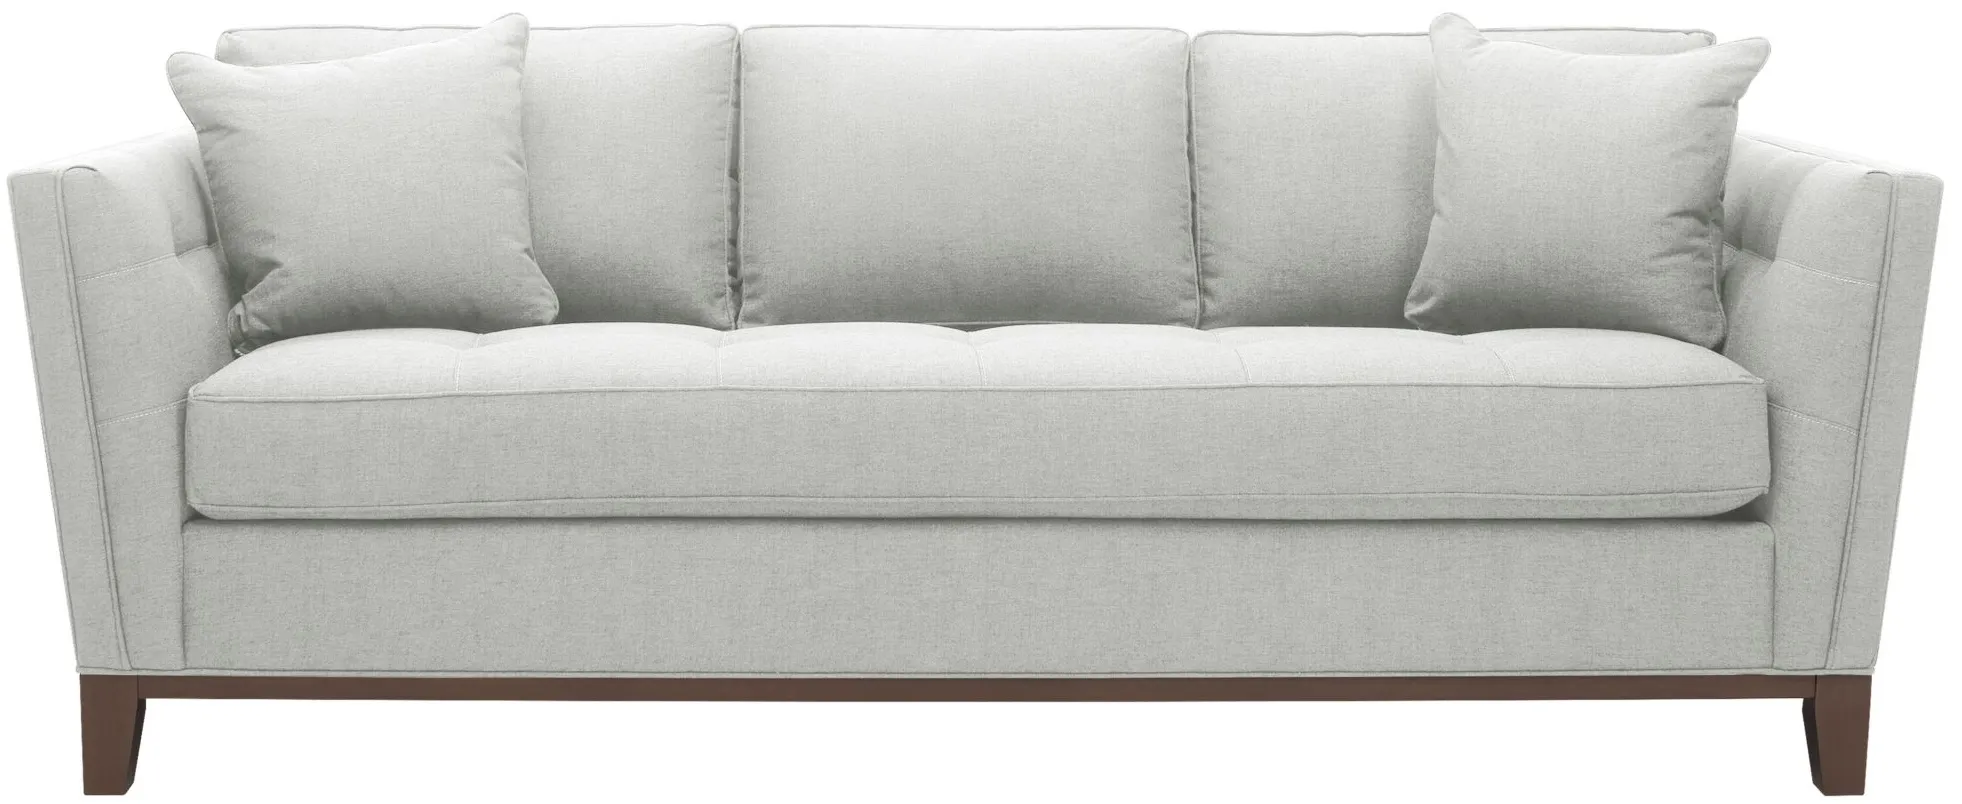 Macauley Queen Sleeper Sofa in Suede So Soft Platinum by H.M. Richards